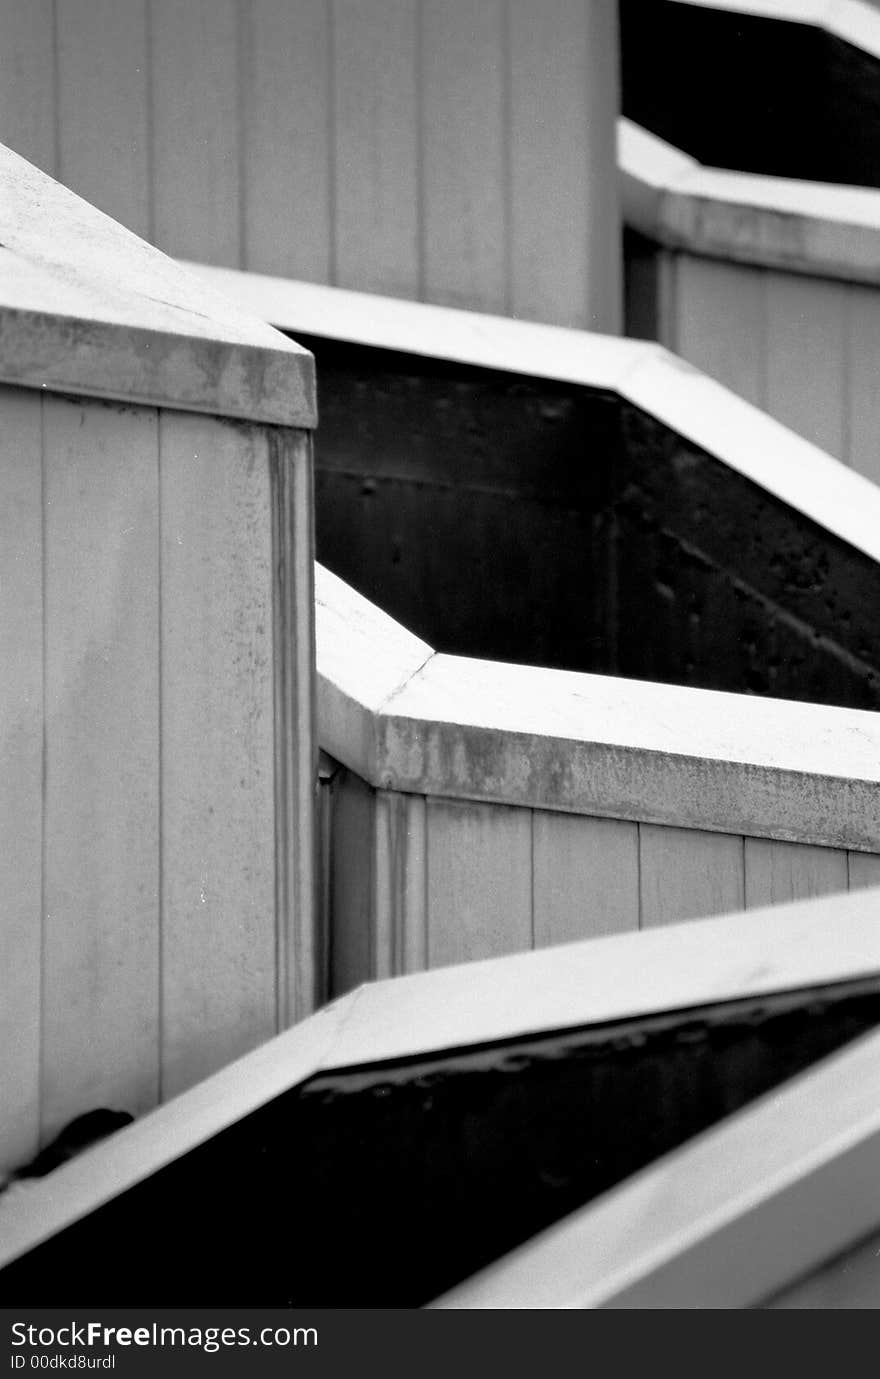 Black and white detail shot of air ducts or vents - look like chimneys